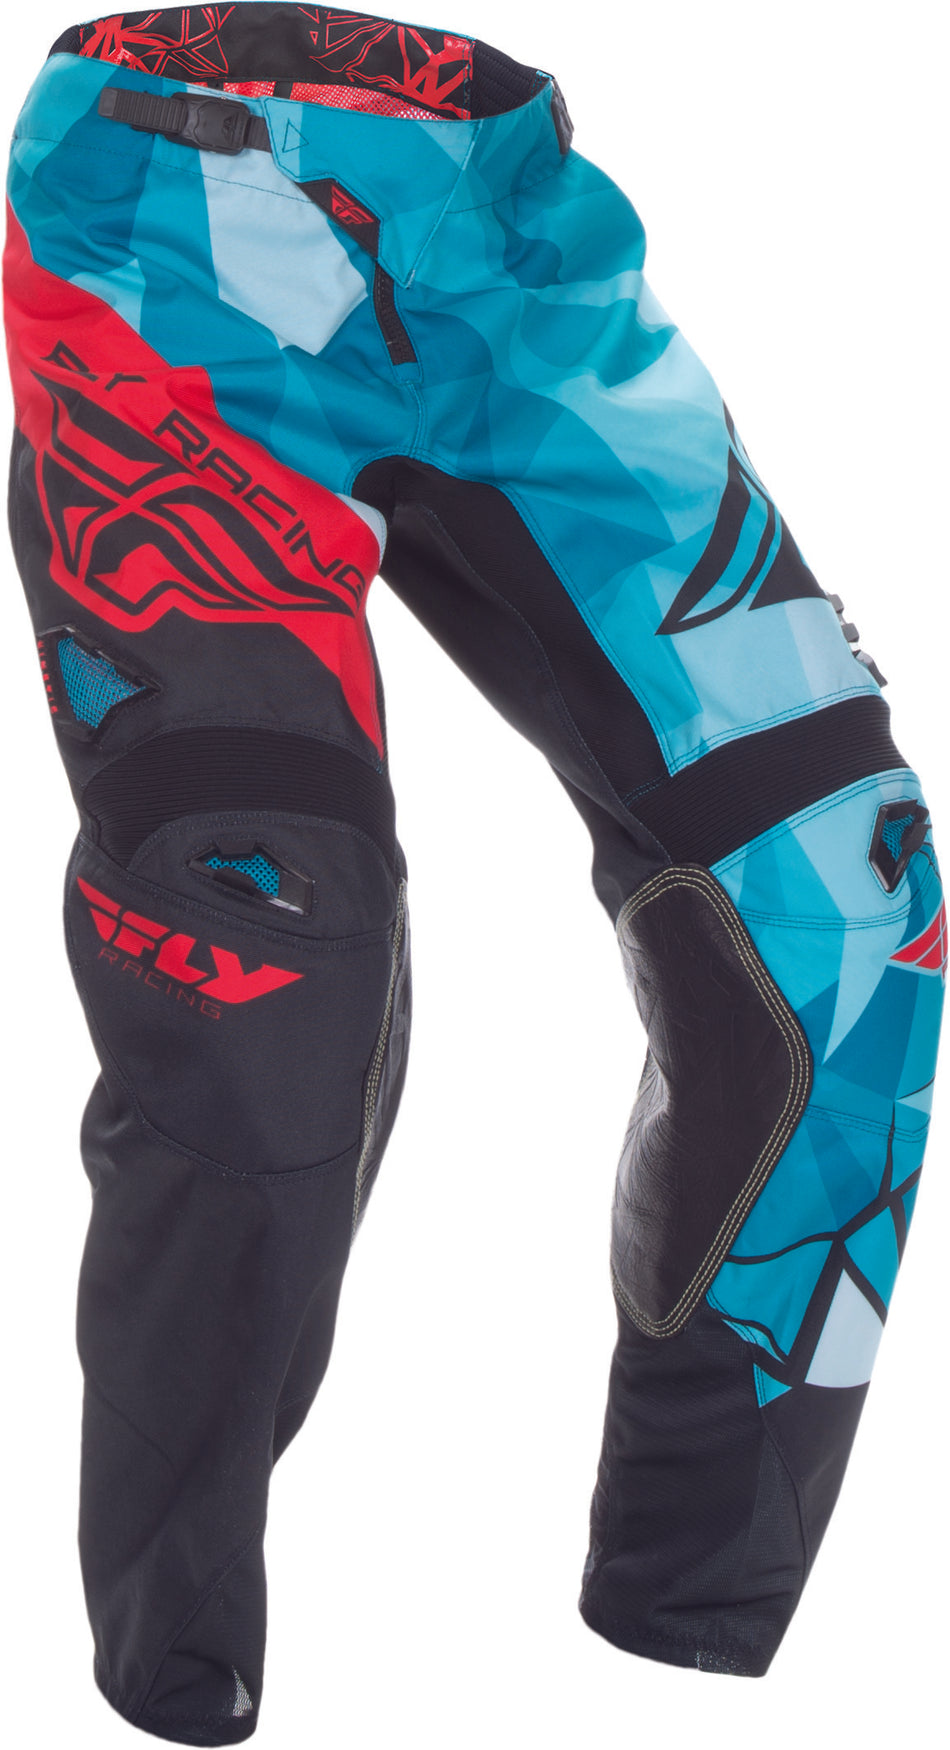 FLY RACING Kinetic Crux Pant Teal/Red Sz 28 370-53928